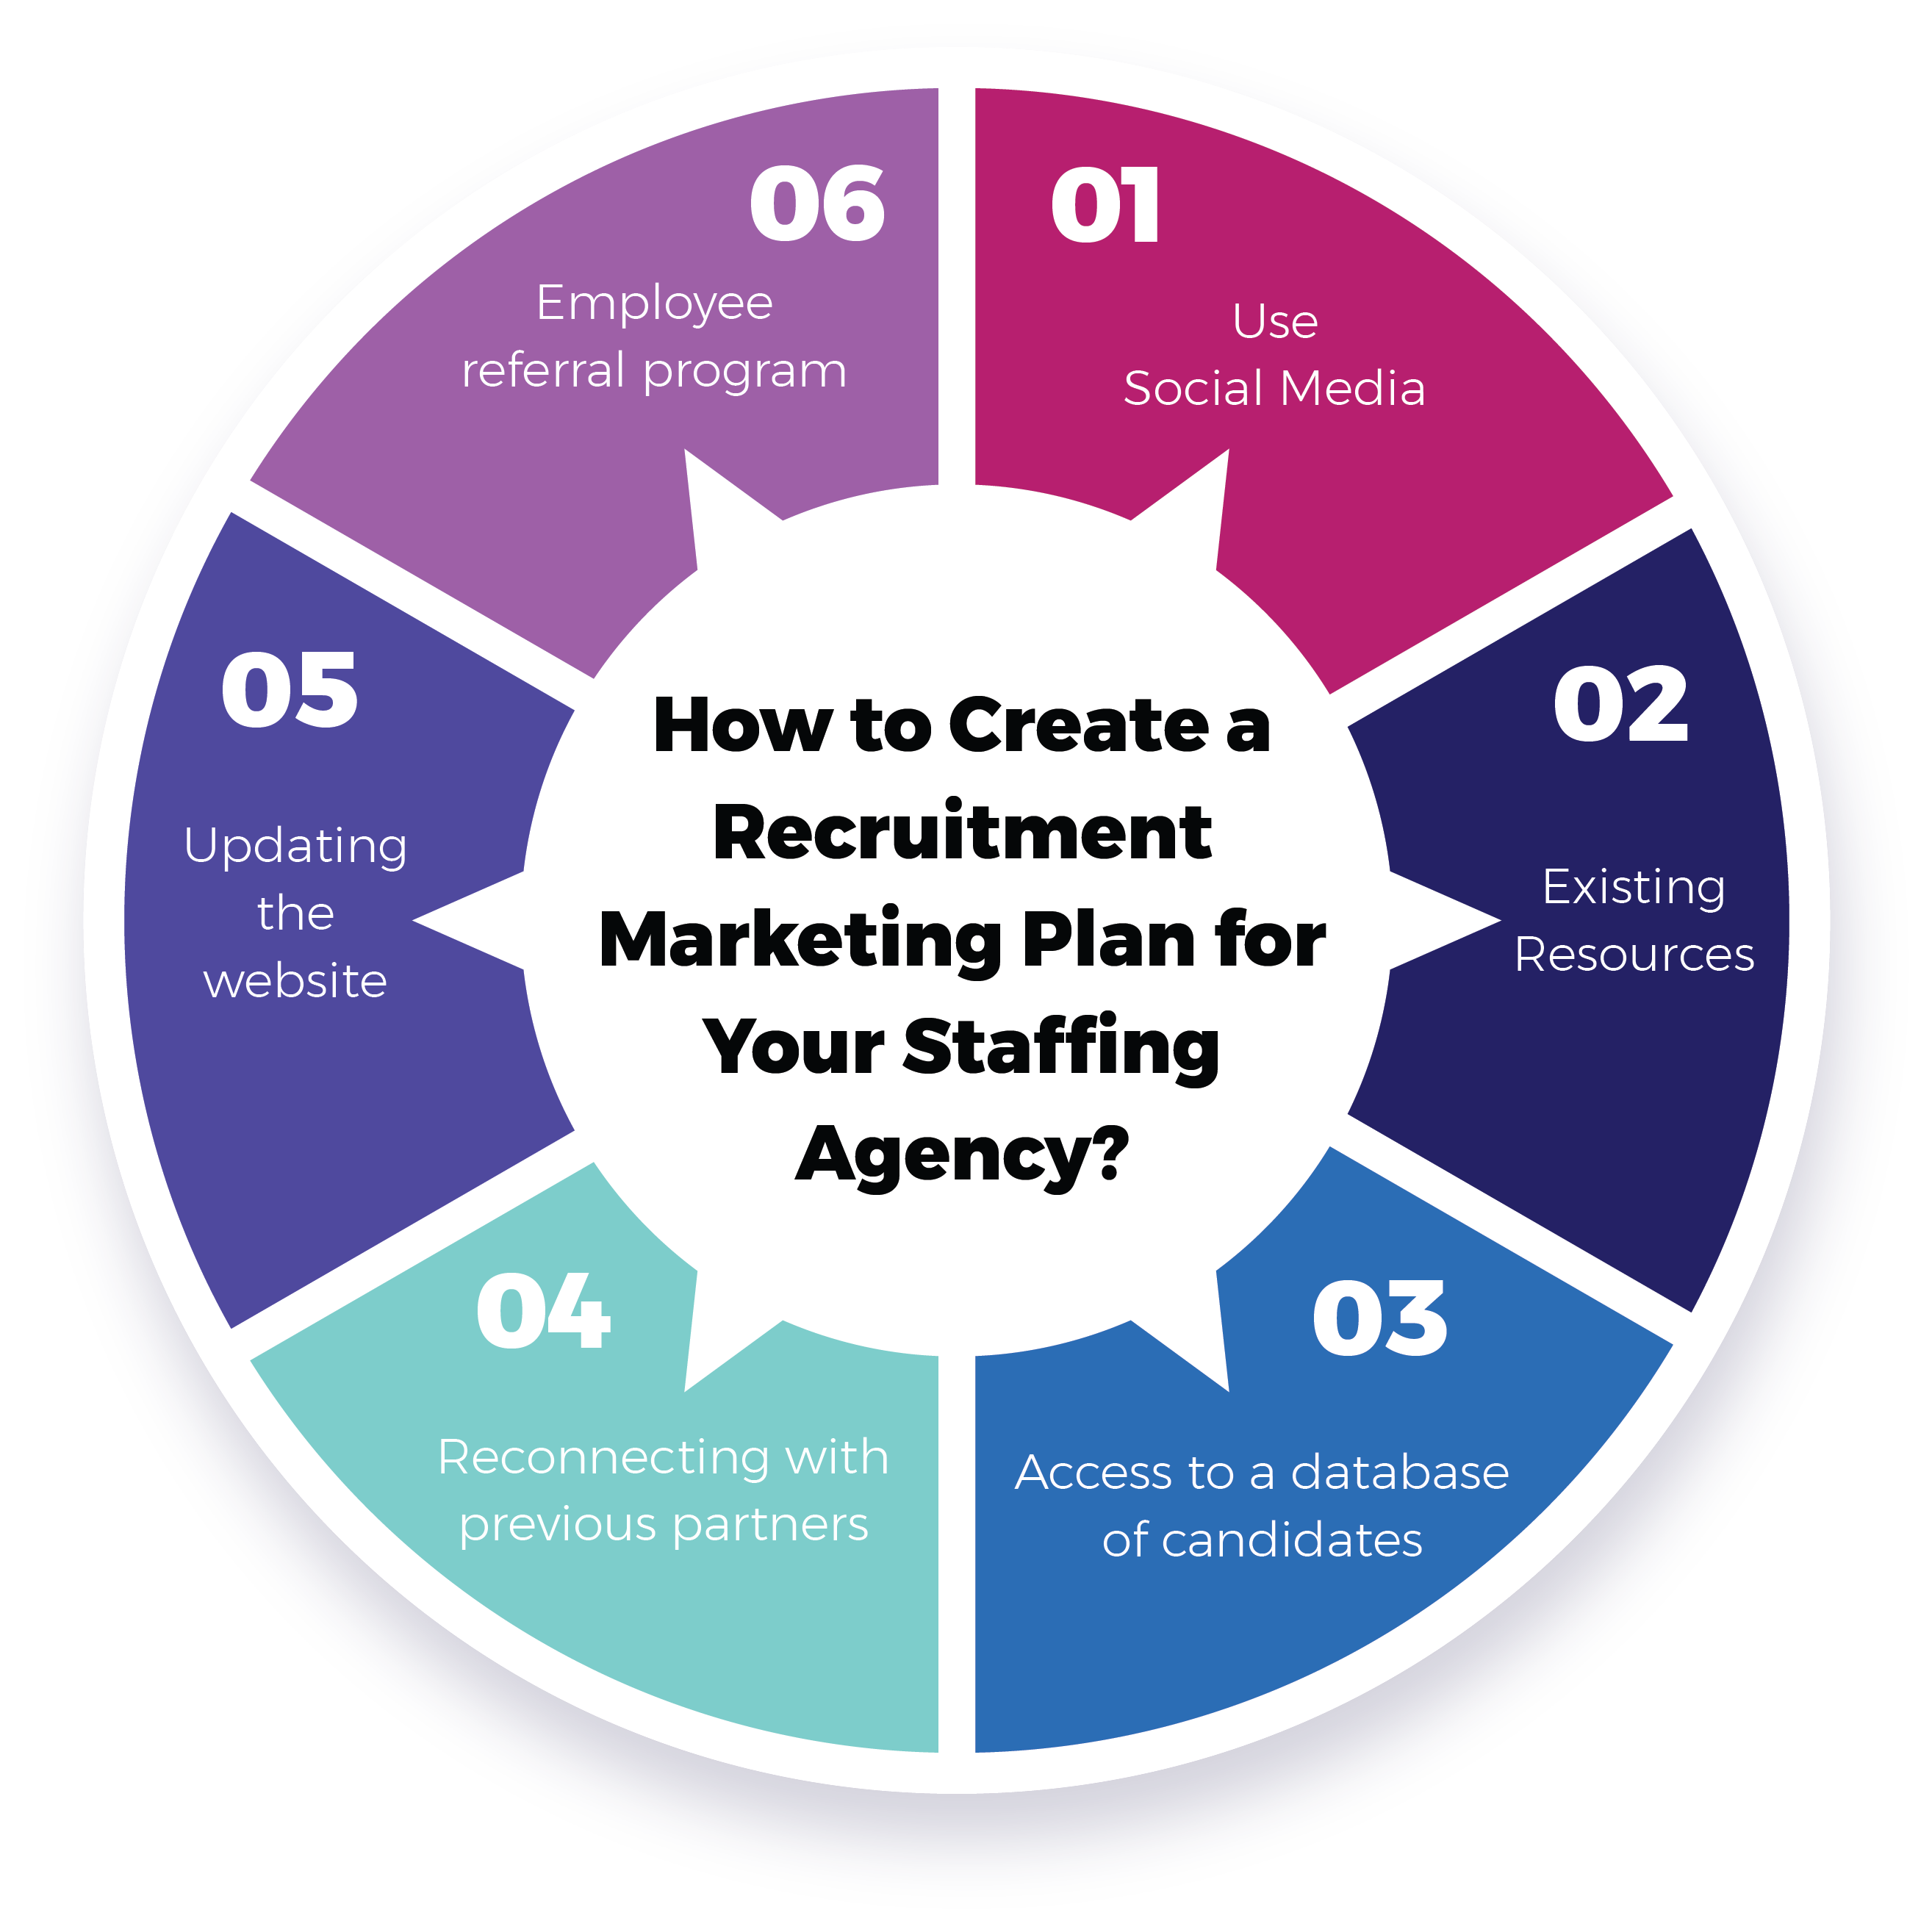 How to Create a Recruitment Marketing Plan for Your Staffing Agency?